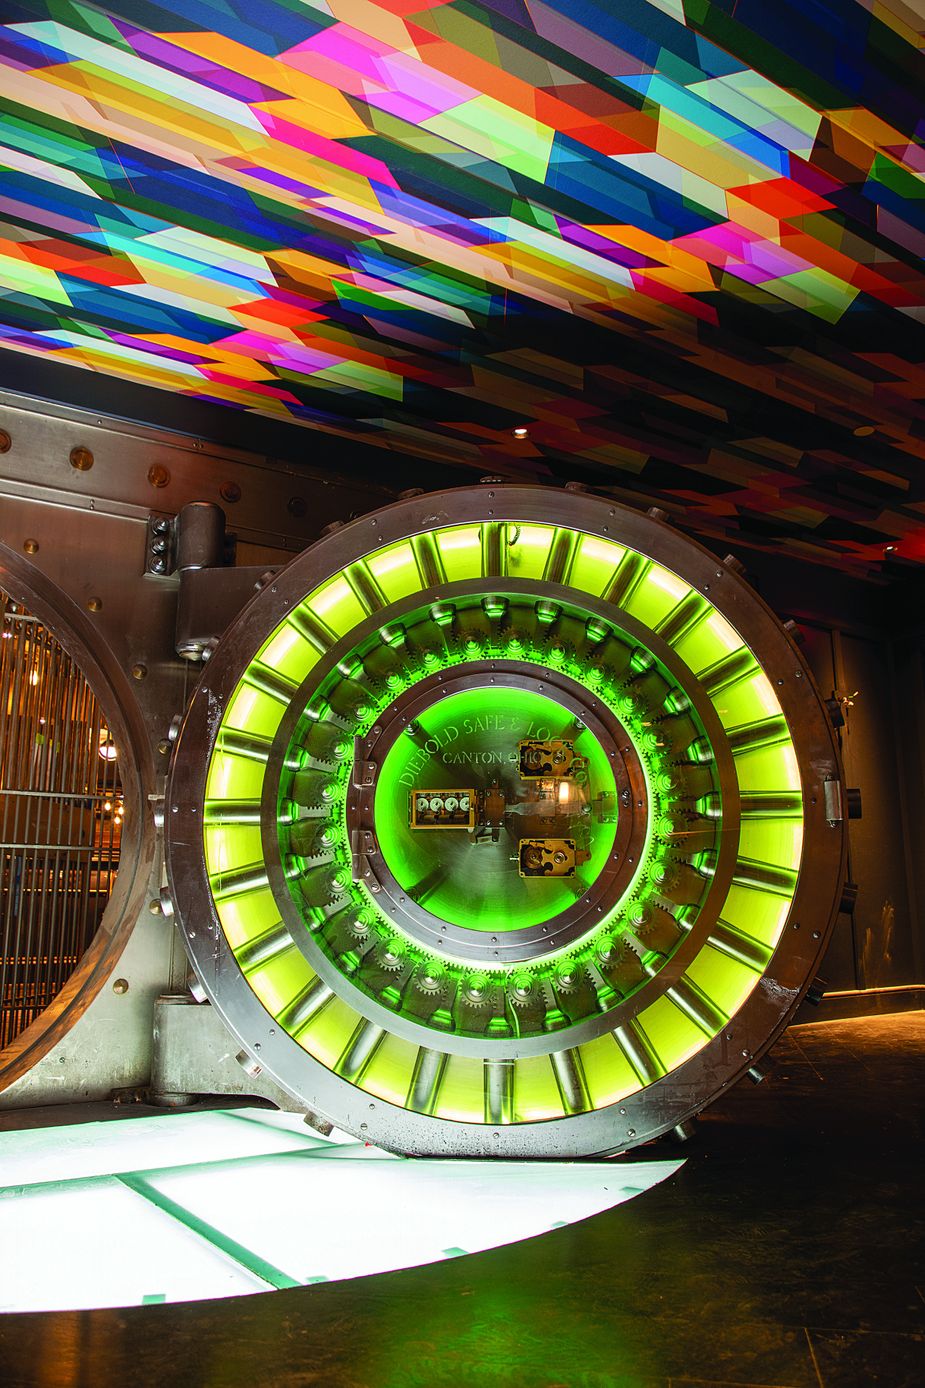 First National Center’s former bank vault, located in the basement, now houses The Library of Distilled Spirits, which specializes in classic cocktails and fine liquors. Patrons enter through the vault doors.